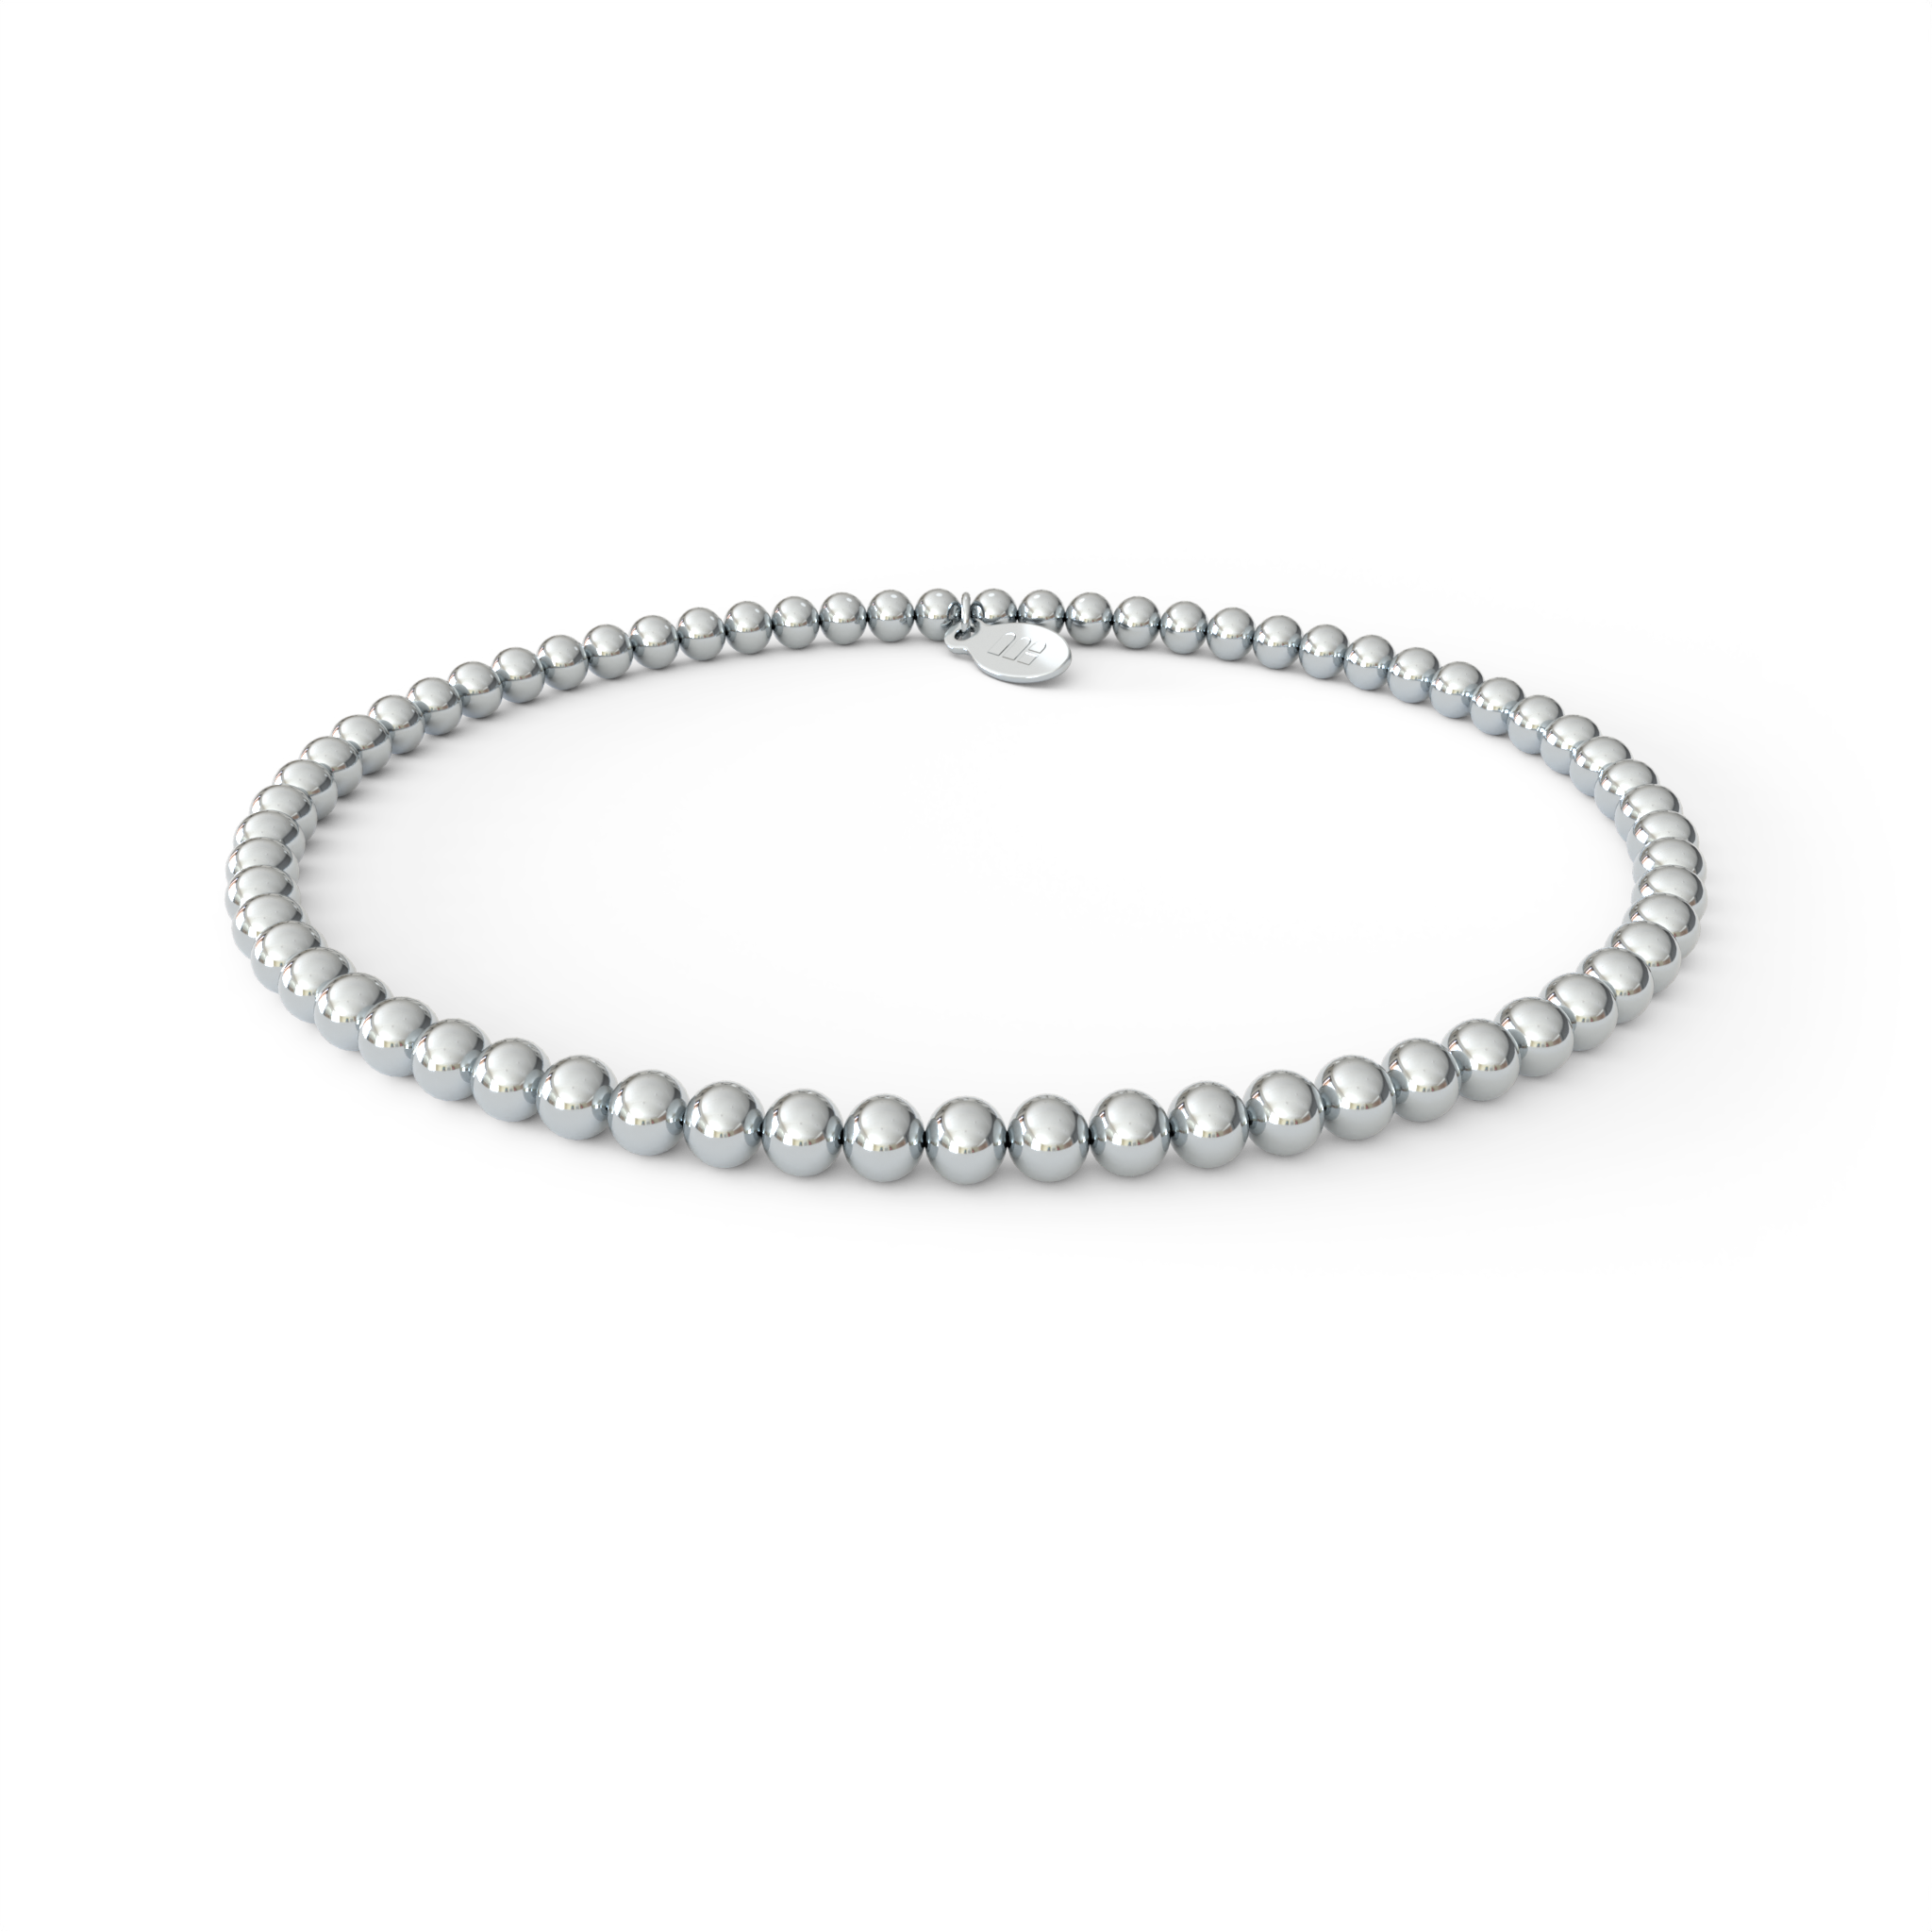 Stretchy Kindness Adult Bracelet (3mm Beads) 7 Inches / Sterling Silver